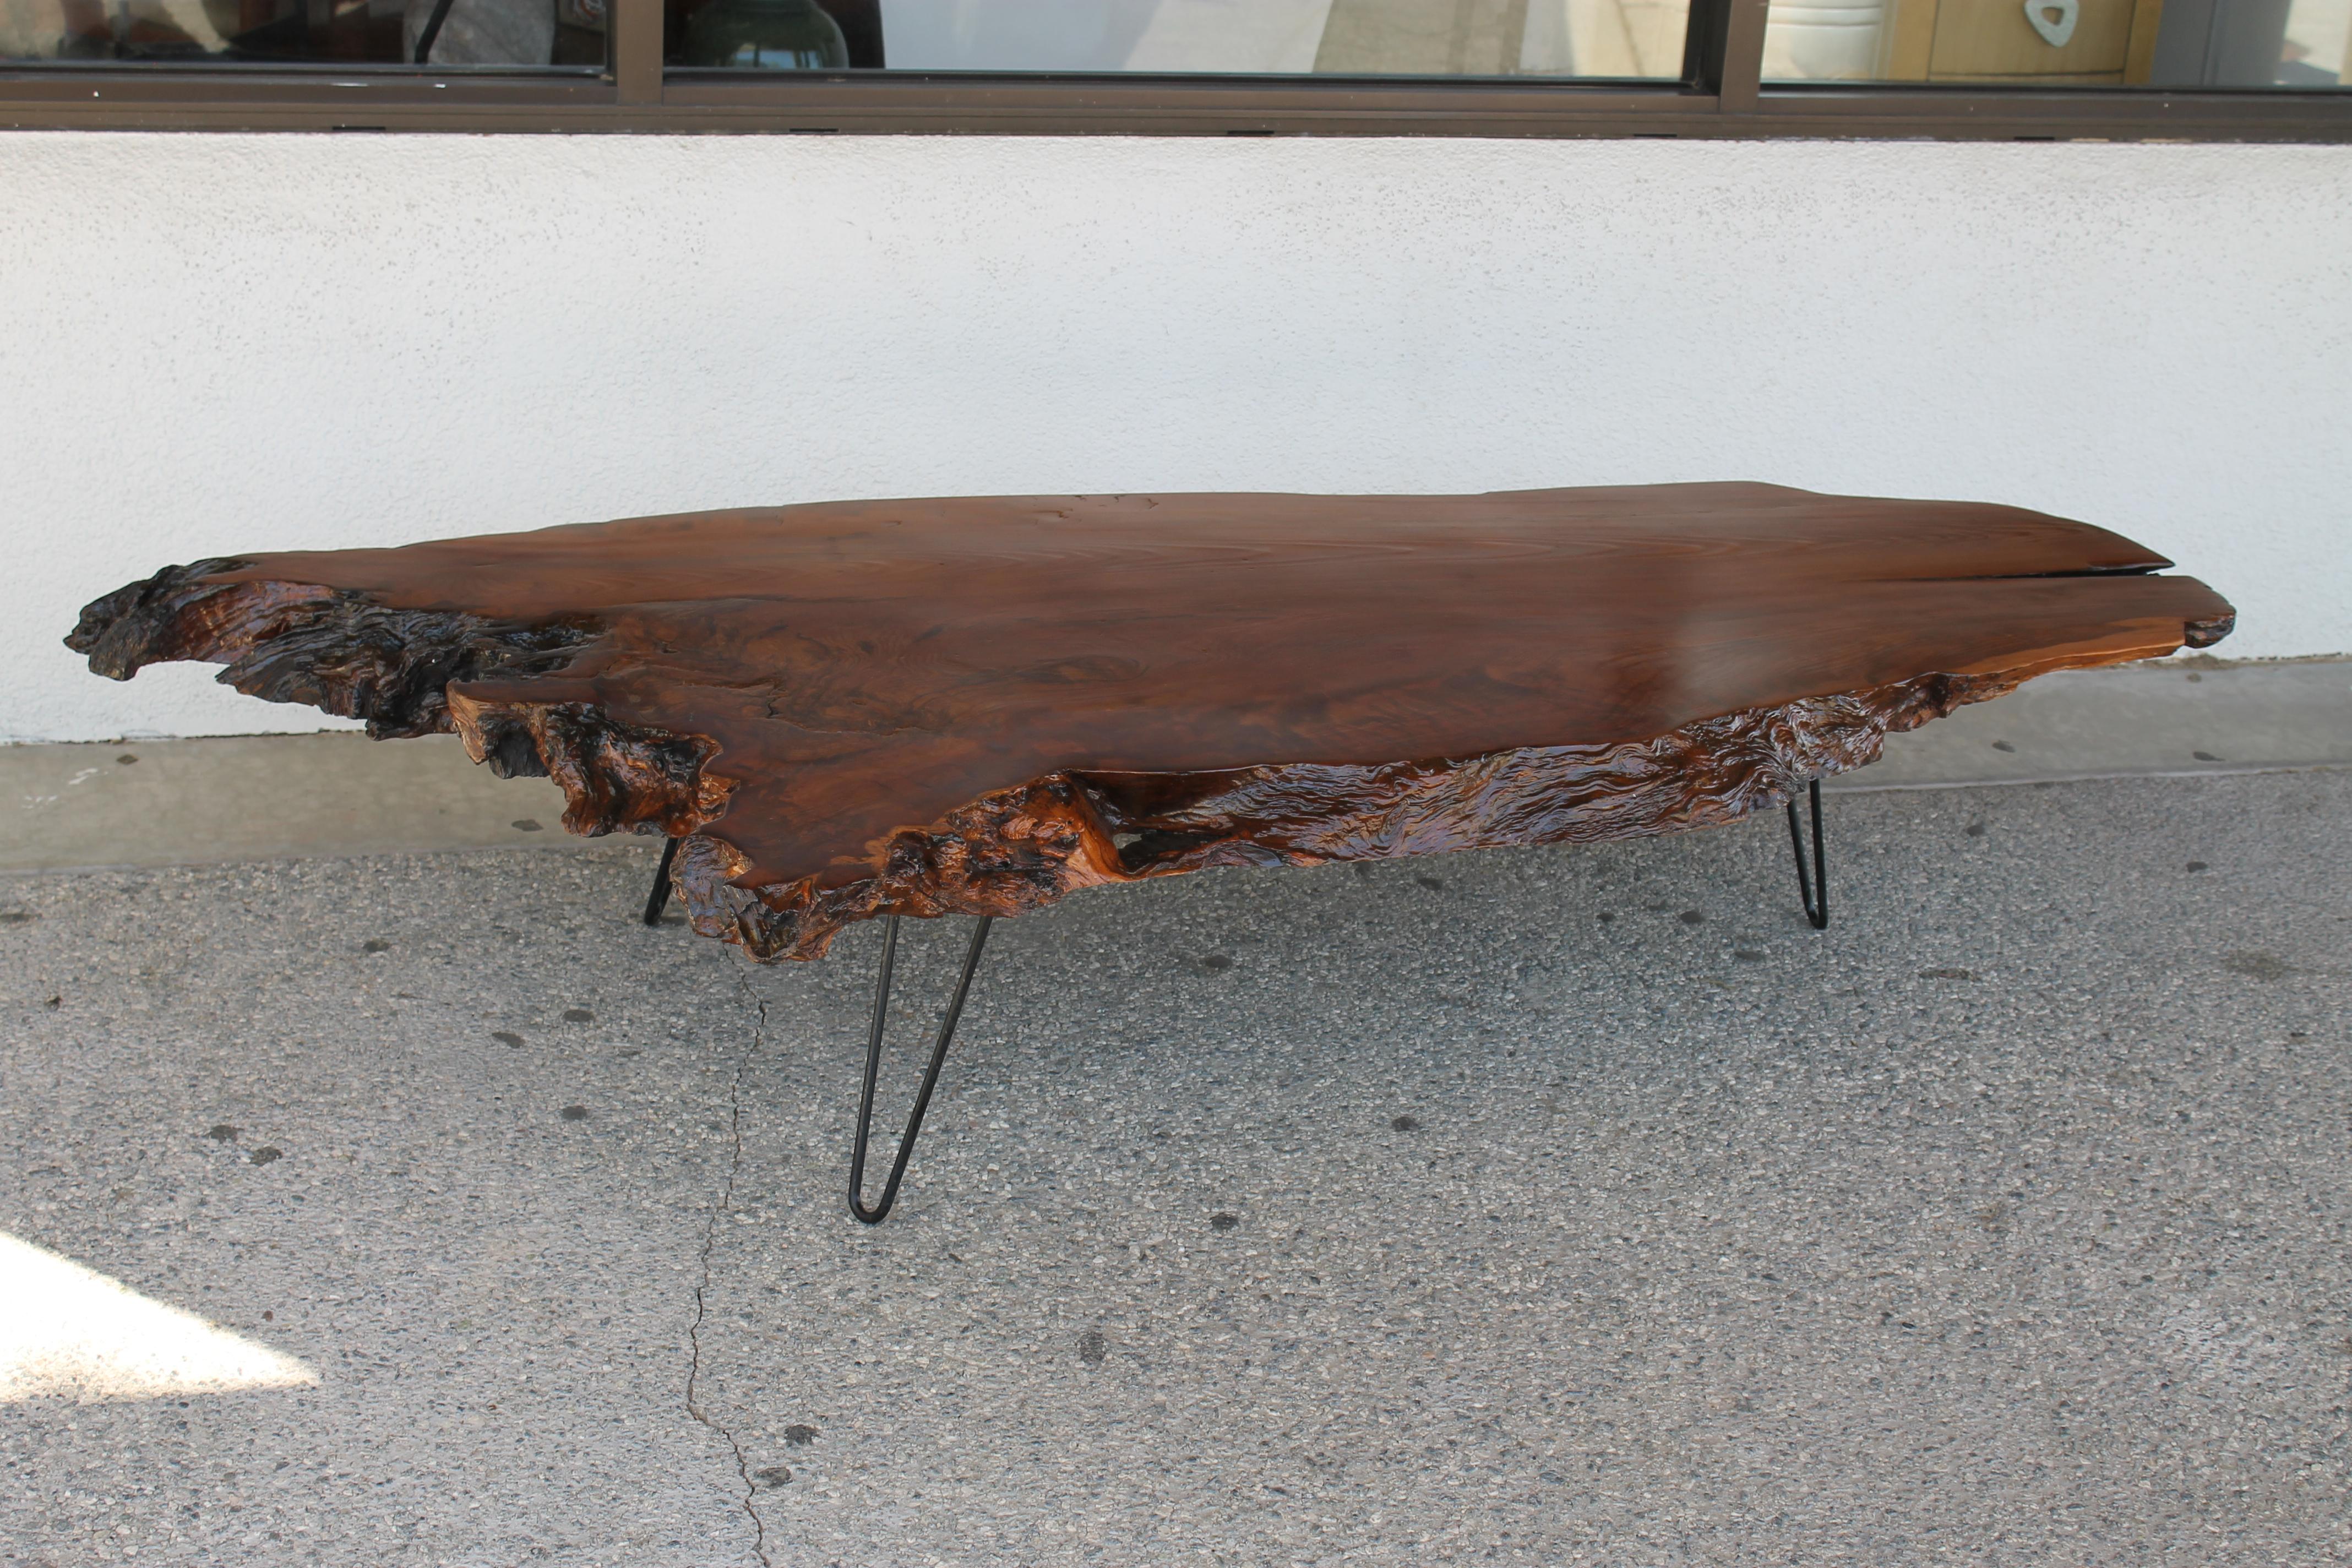 A circa 1979 redwood burl slab table with bark edges. Professionally refinished with hairpin legs. Table measures approximately 74